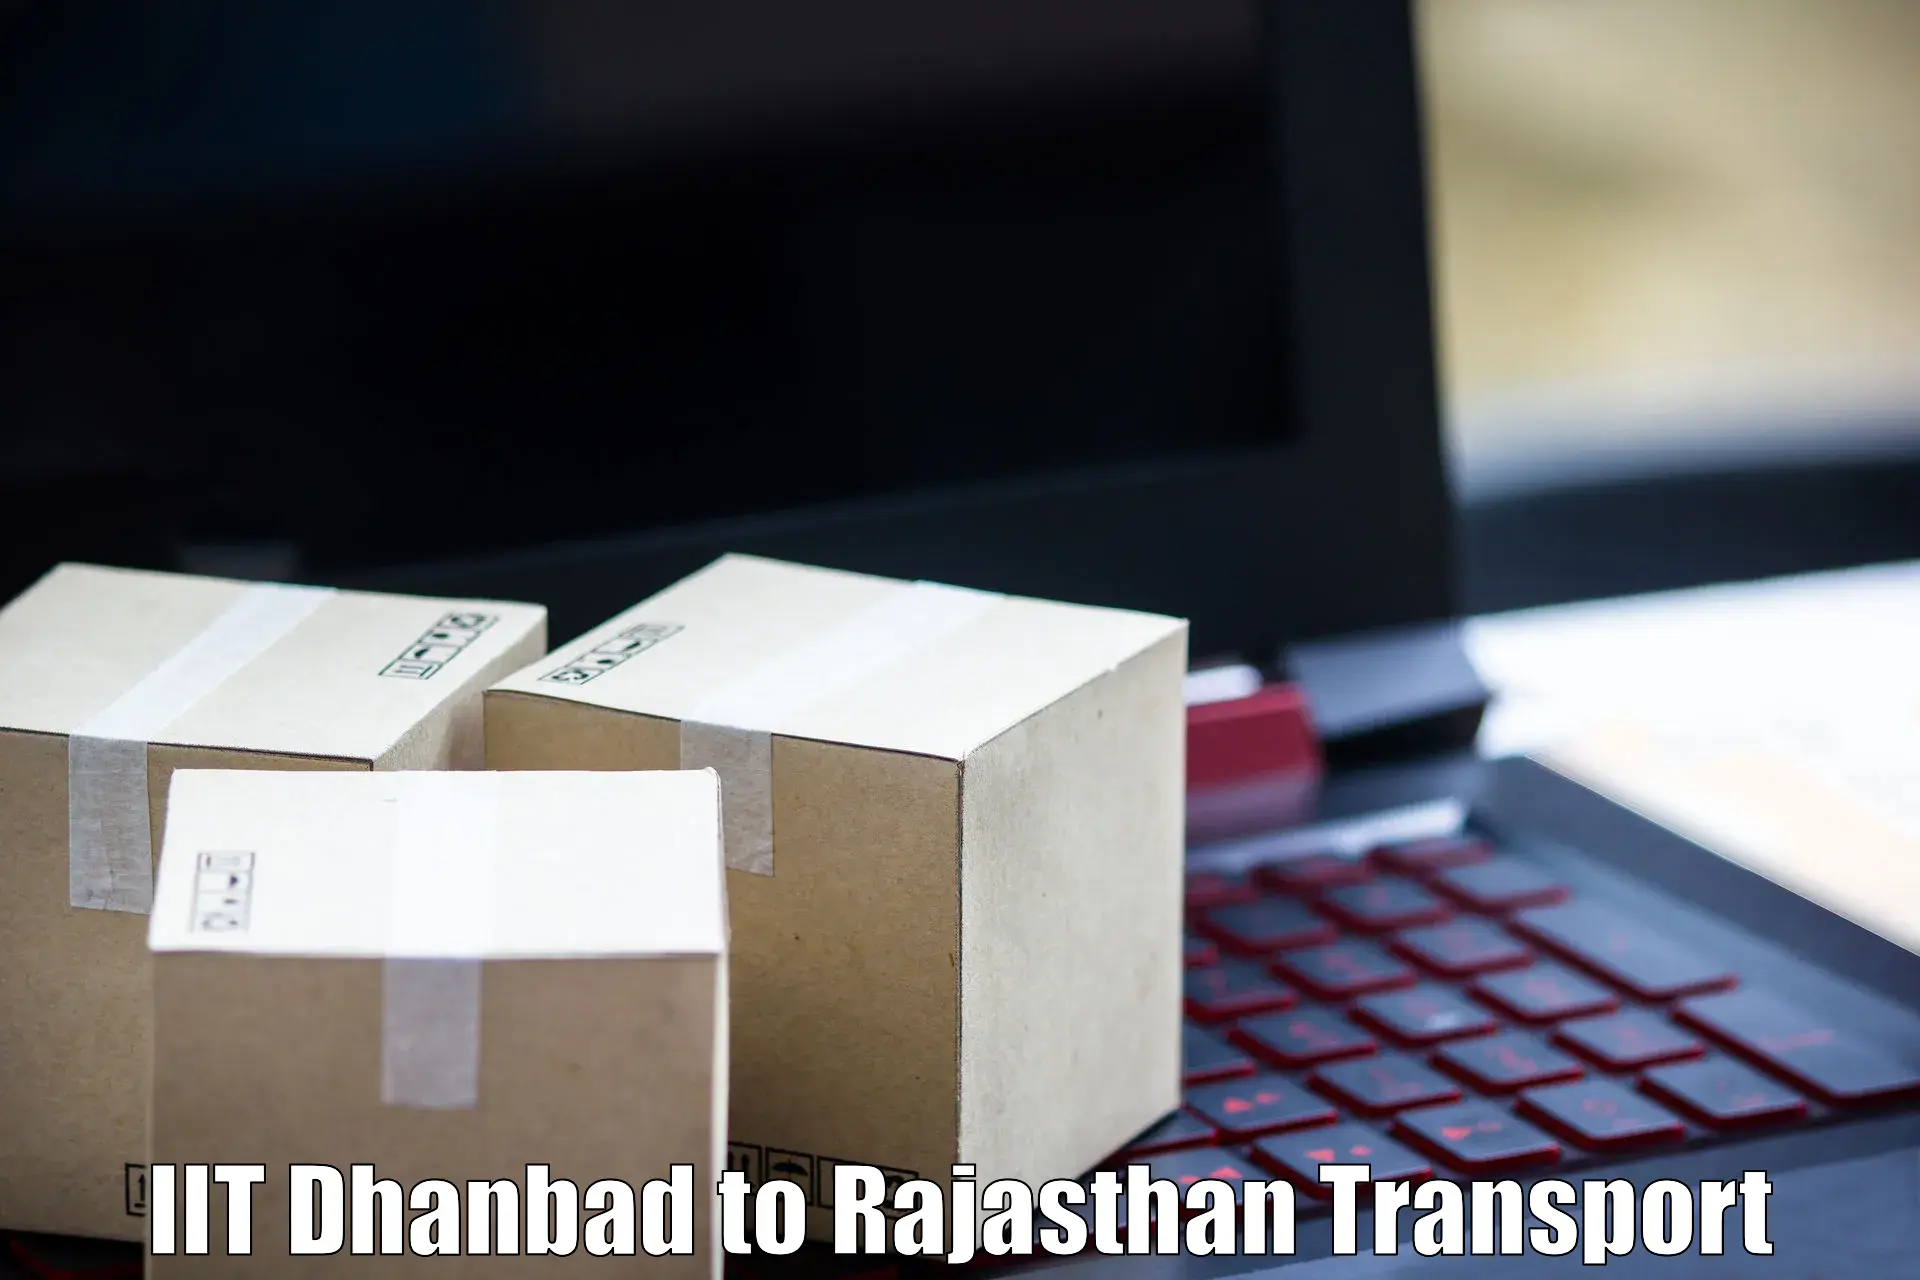 Nearby transport service IIT Dhanbad to Dausa